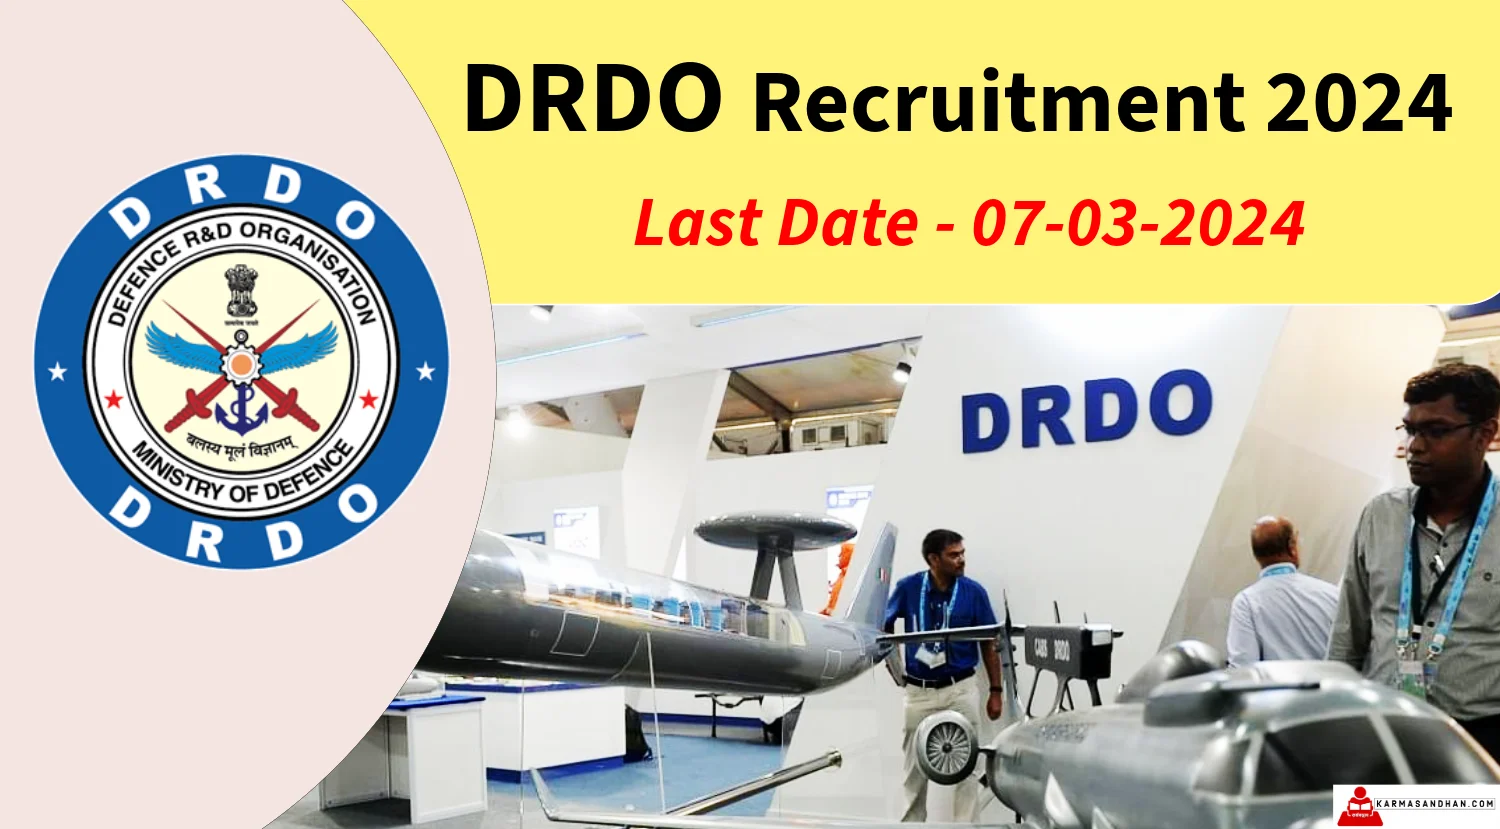 DRDO Recruitment 2024 for Various Vacancies, Apply Now under VRDE